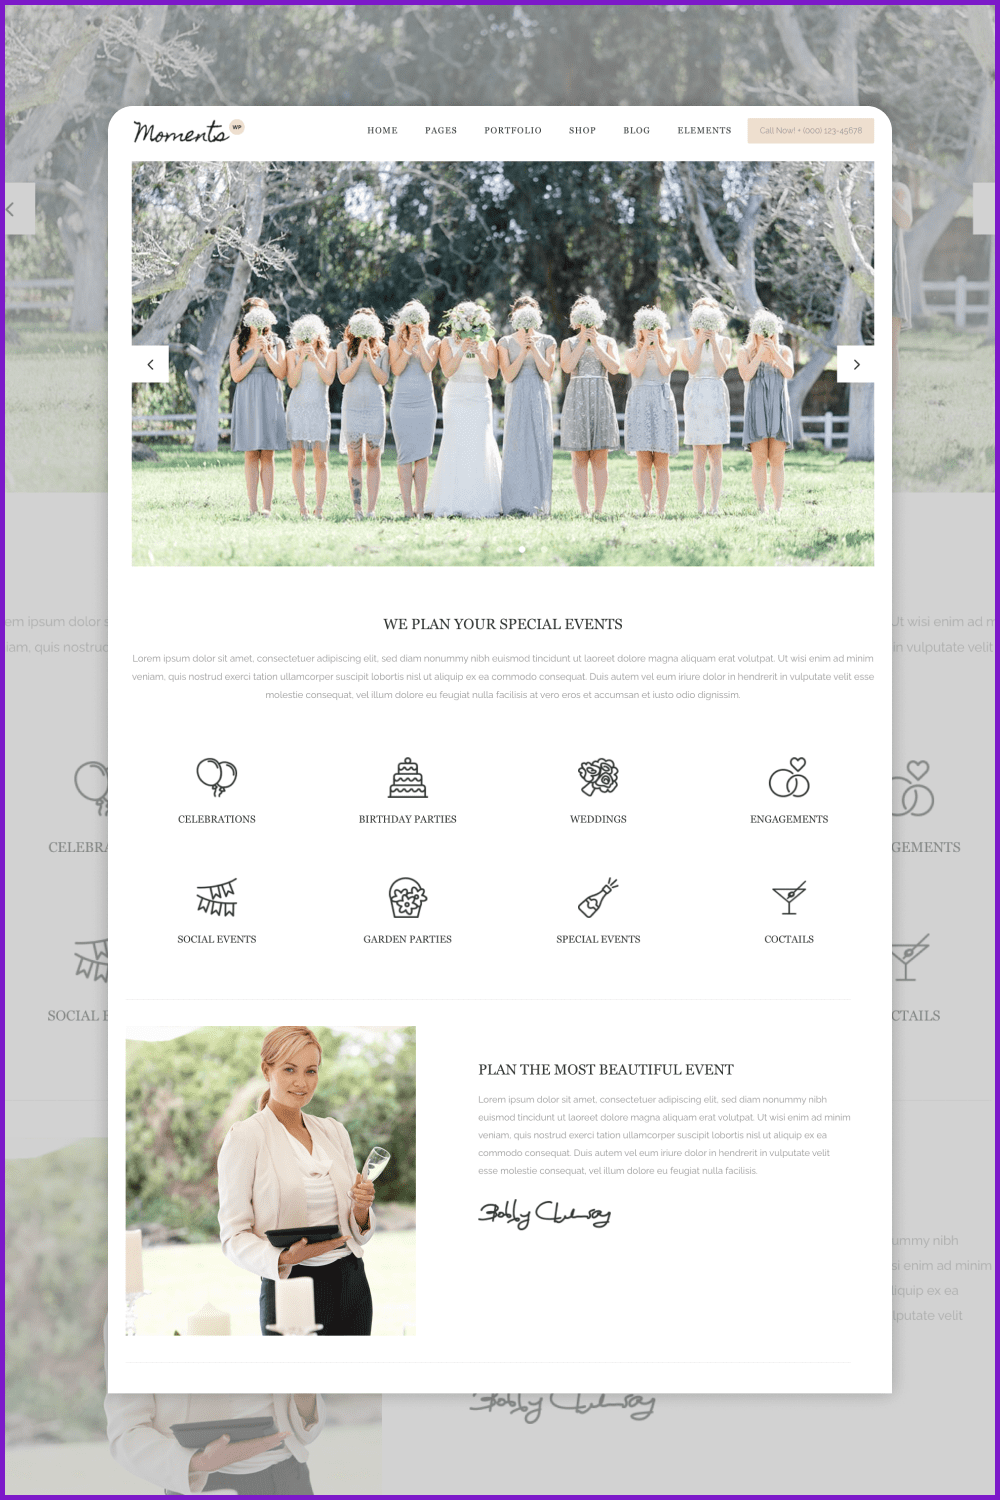 WordPress site page with a large photo of the bride with bridesmaids and bright icons.